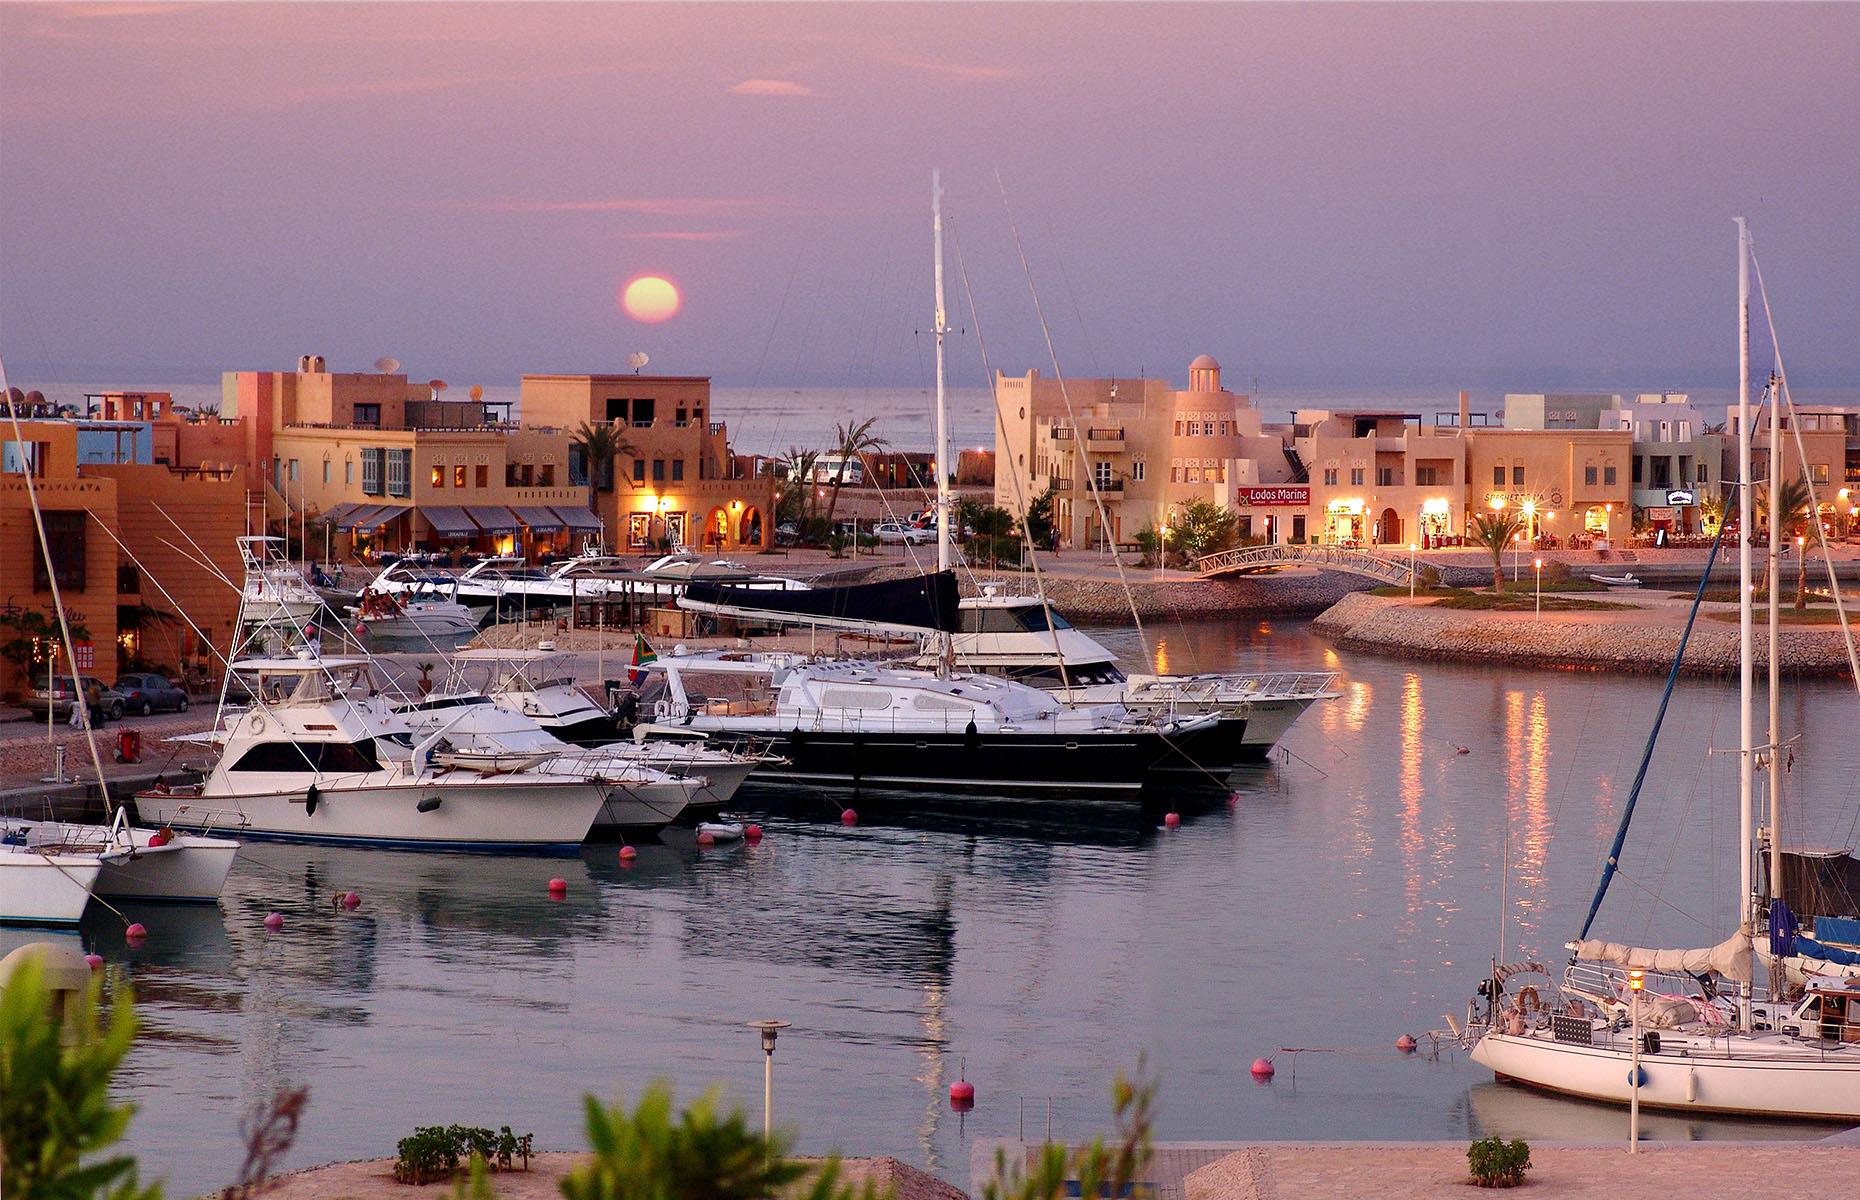 <p>El Gouna’s resorts cram in plenty to do, but there’s more life to be found away from the hotel pools and beaches. Abu Tig Marina is one of the main hubs for when you want to explore a little more, and a very pretty one at that. When the sun is shining (as it does on average for 350 days a year here), this area of tinkling boats, chic souvenir and clothing stores, and waterfront cafes and restaurants positively sparkles.</p>